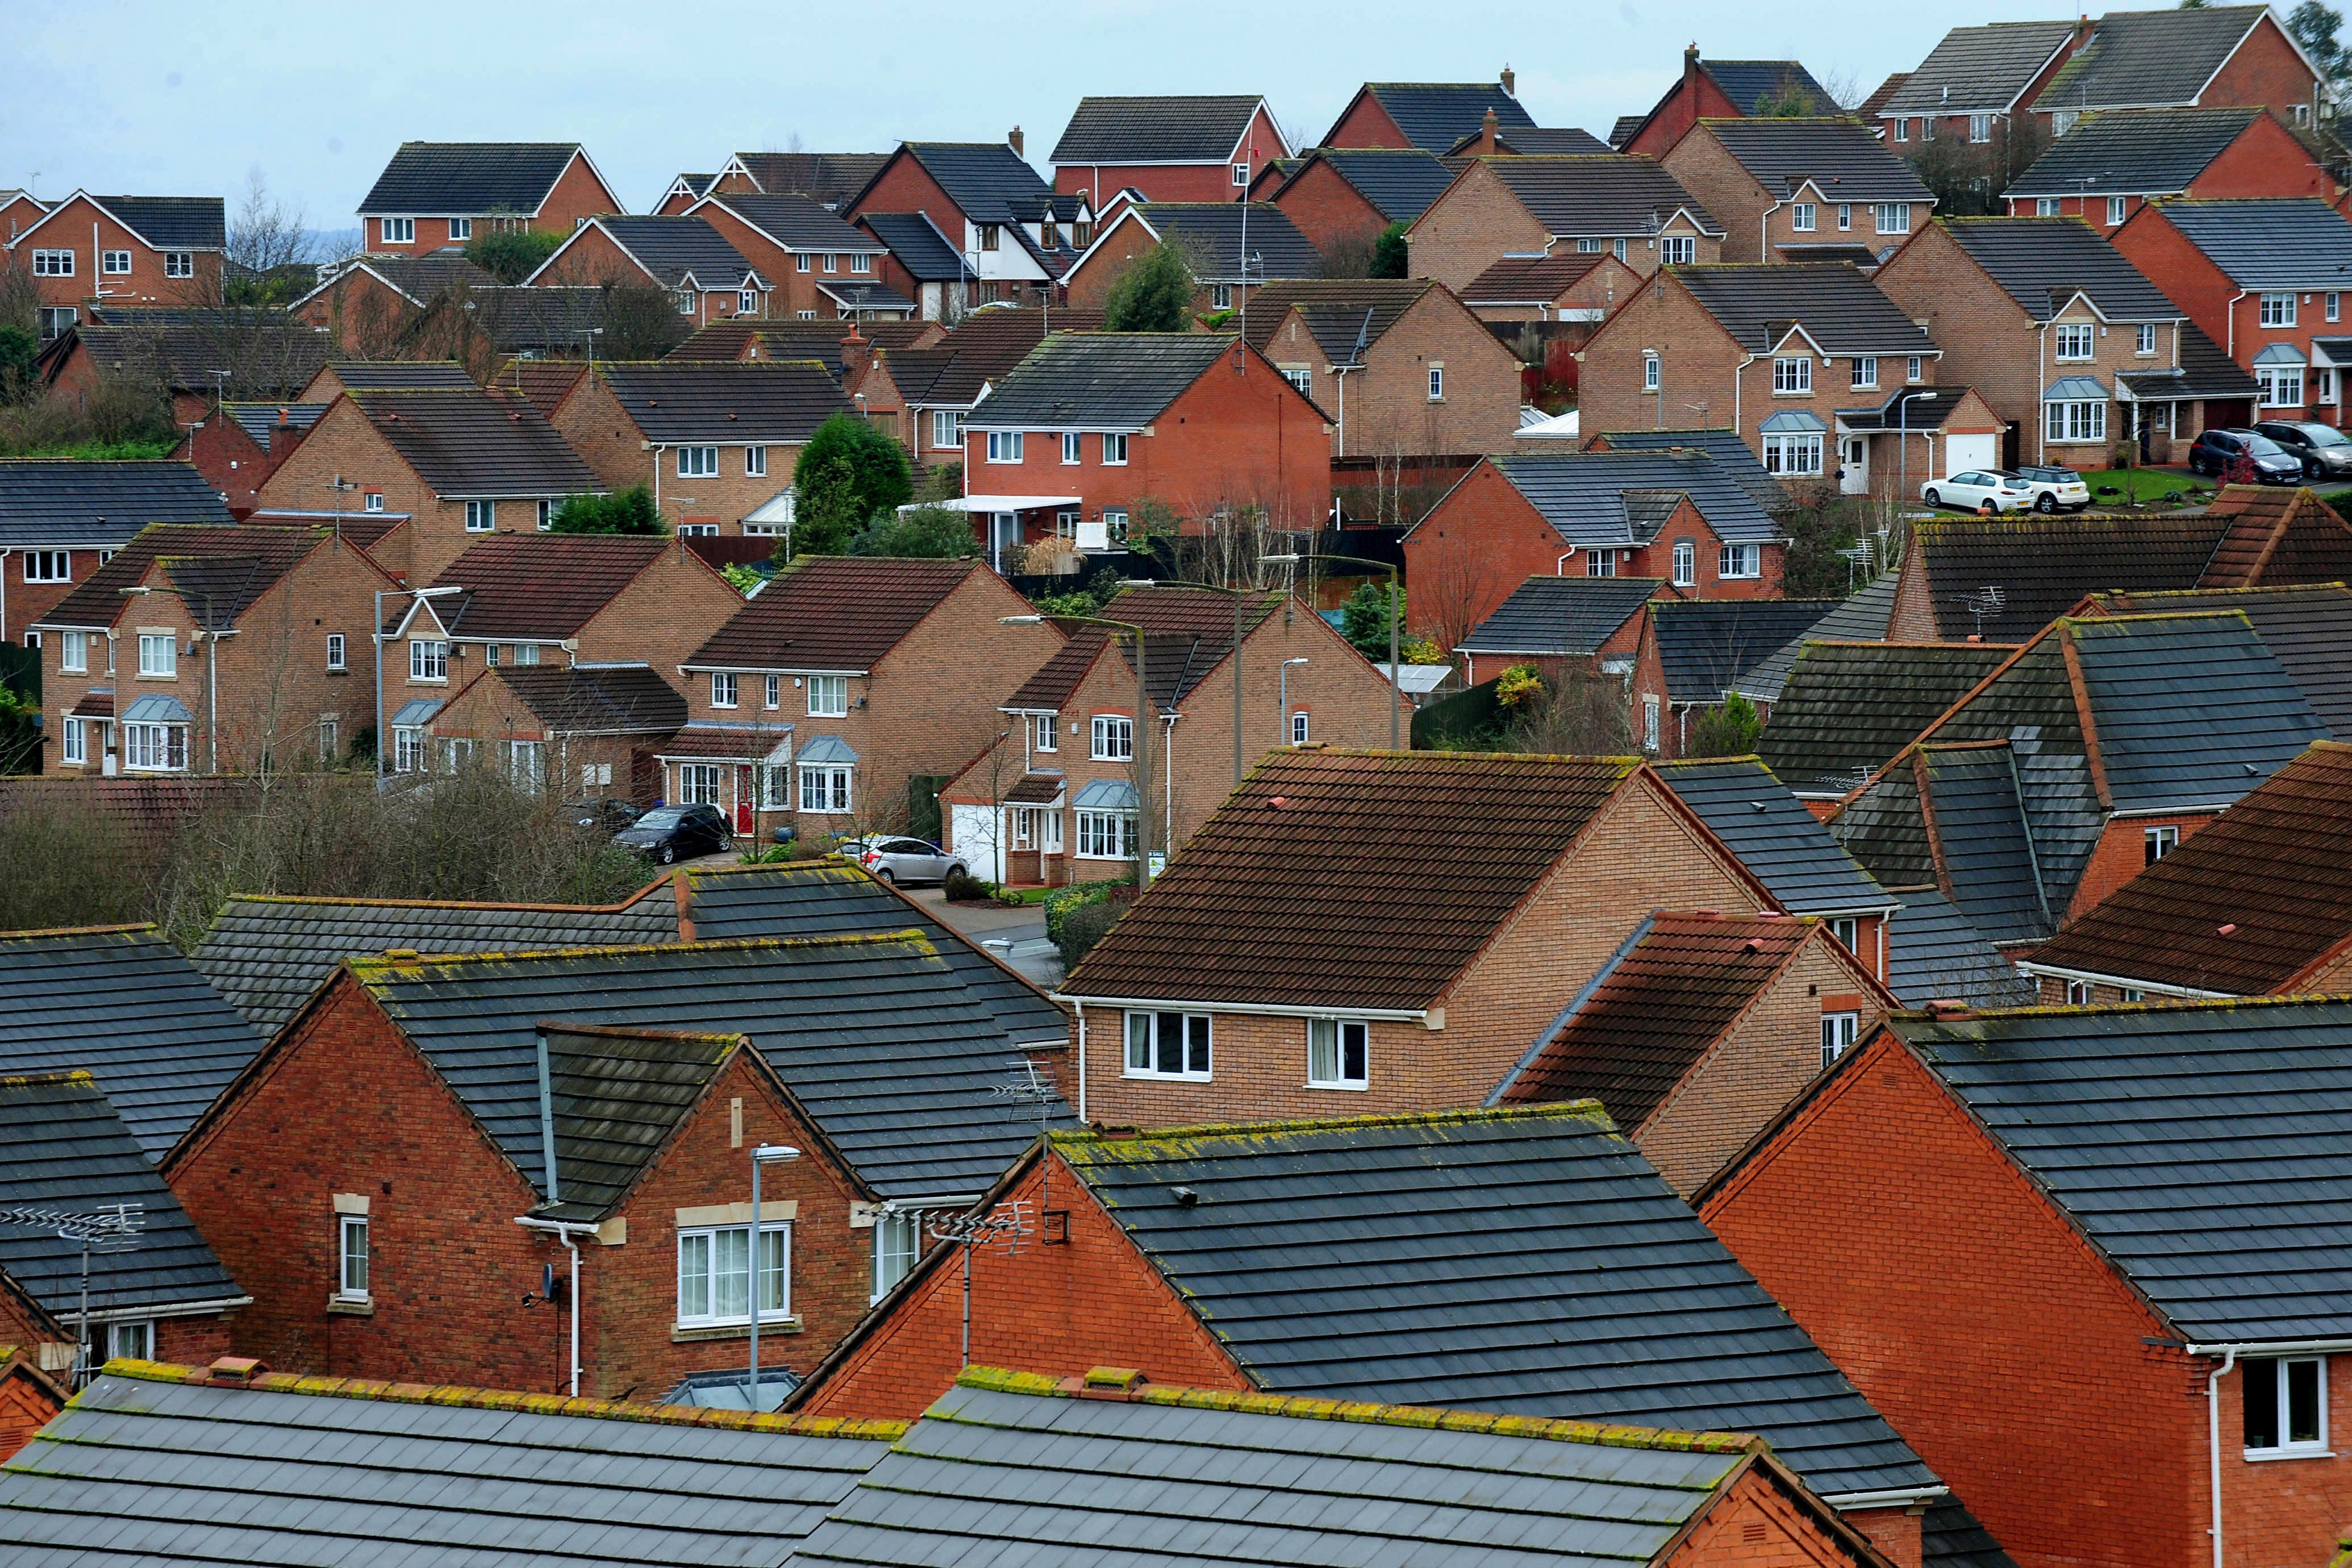 Across the UK, house prices typically fell by 0.1% month on month in May, according to Nationwide Building Society